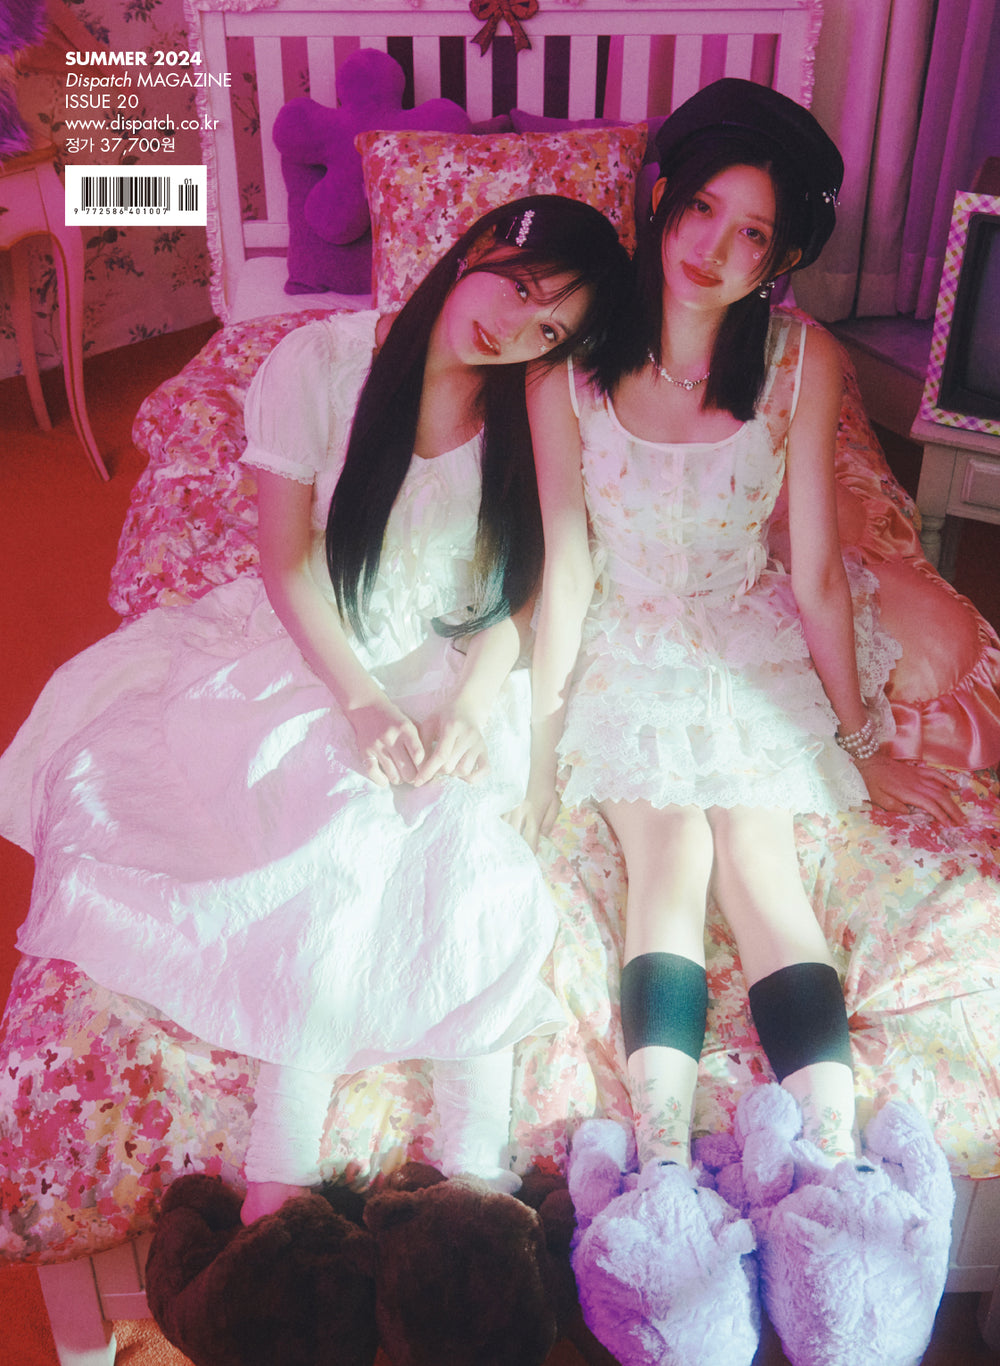 [Pre-Order] DICON VOLUME N°20 IVE : I haVE a dream, I haVE a fantasy / (B type) 06 LEESEO